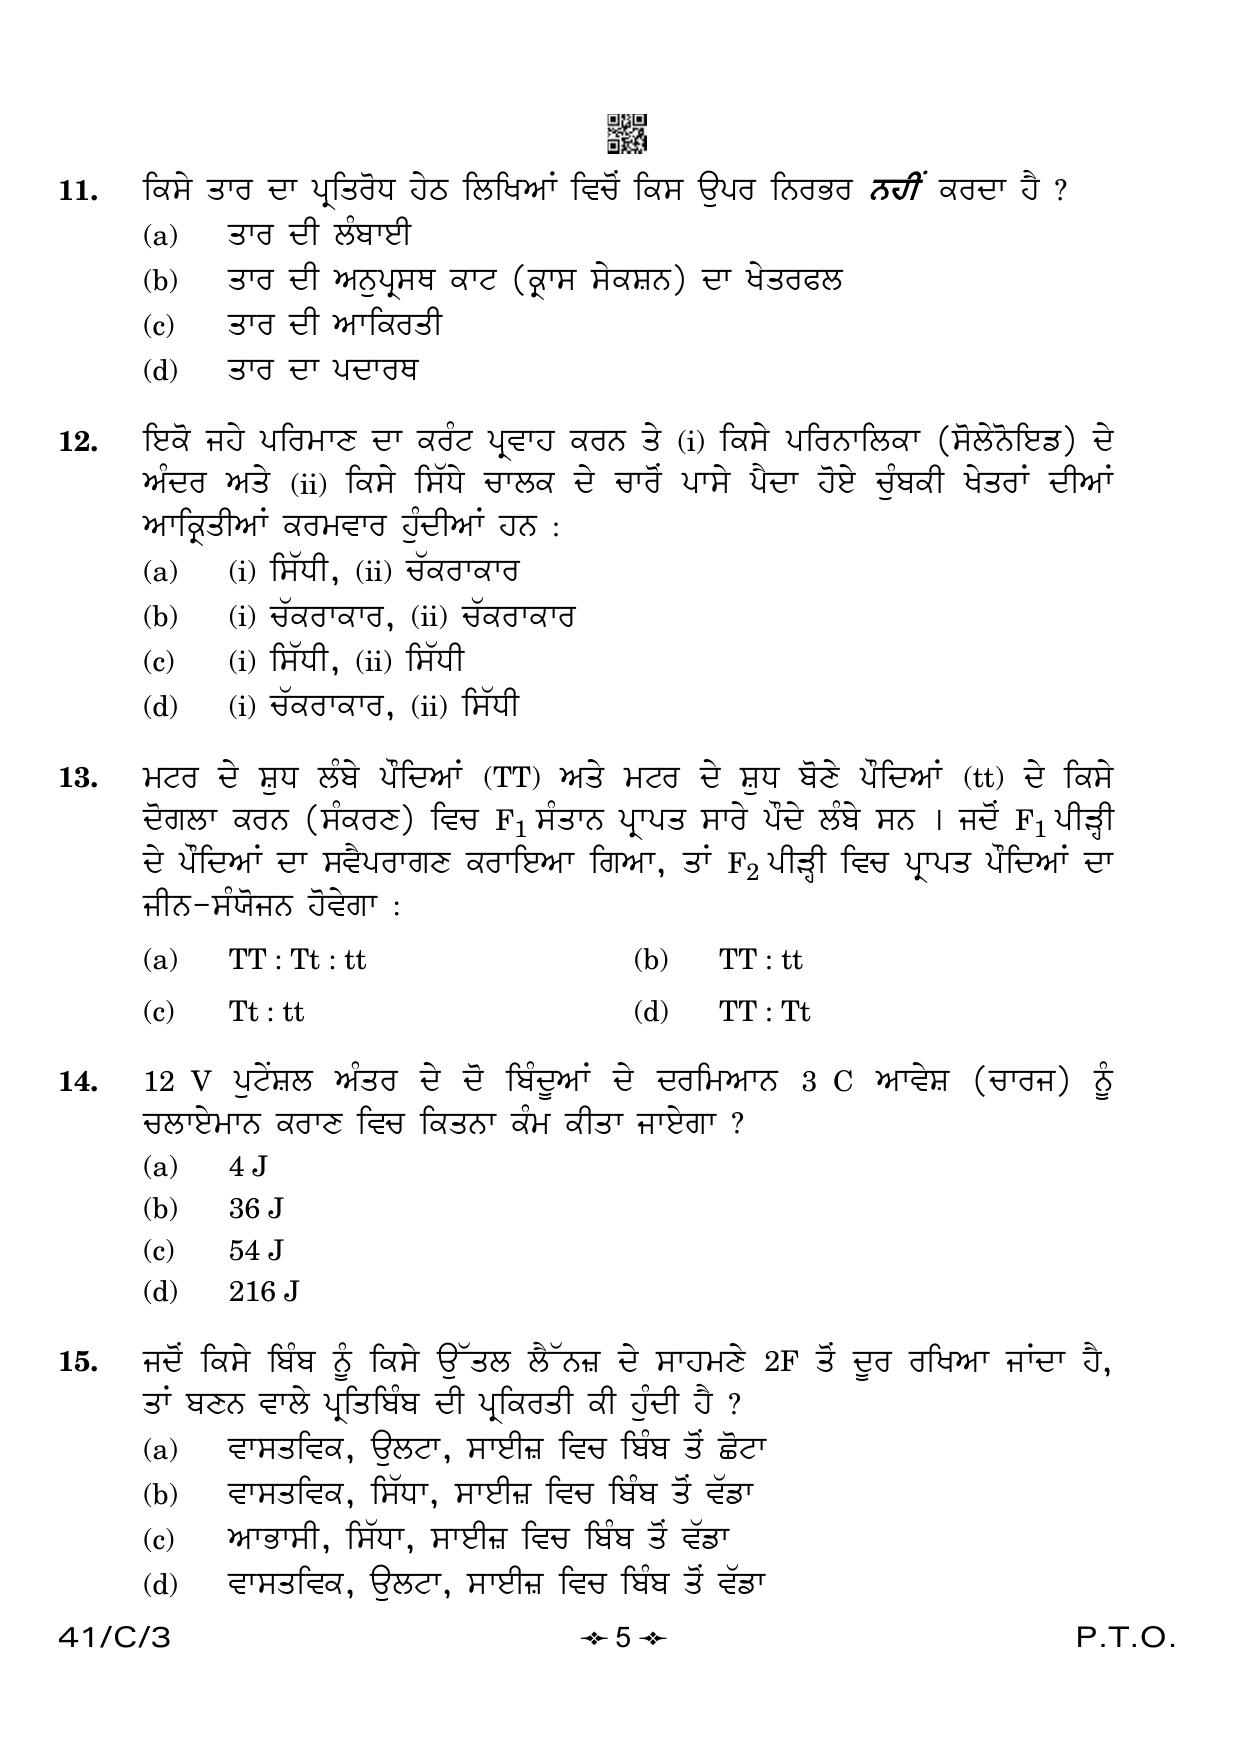 CBSE Class 10 41-3 Science Punjabi 2023 (Compartment) Question Paper - Page 5